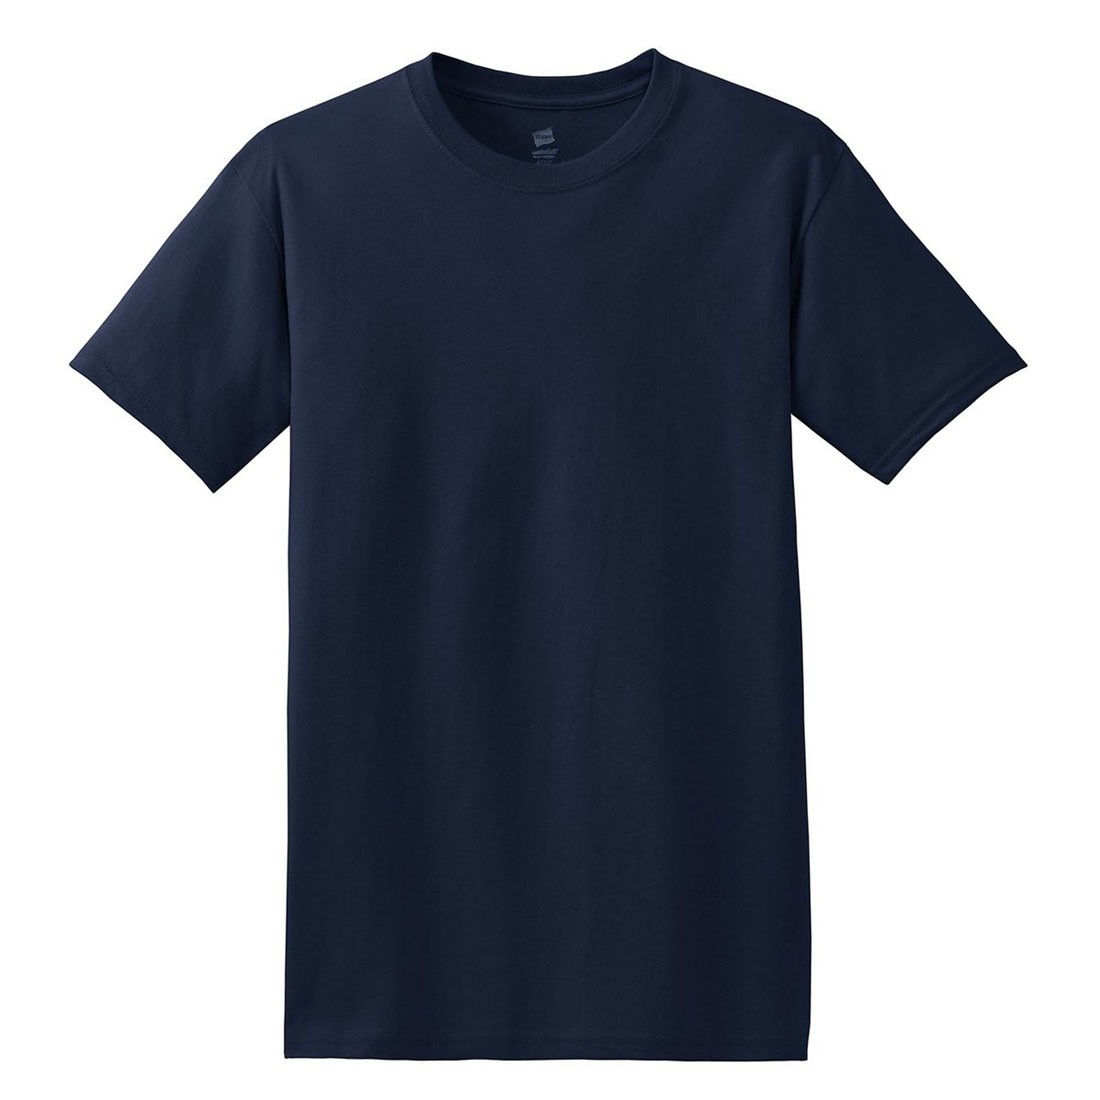 Order Hanes Heavyweight Cotton T-Shirt - Navy - Hanes, delivered to ...